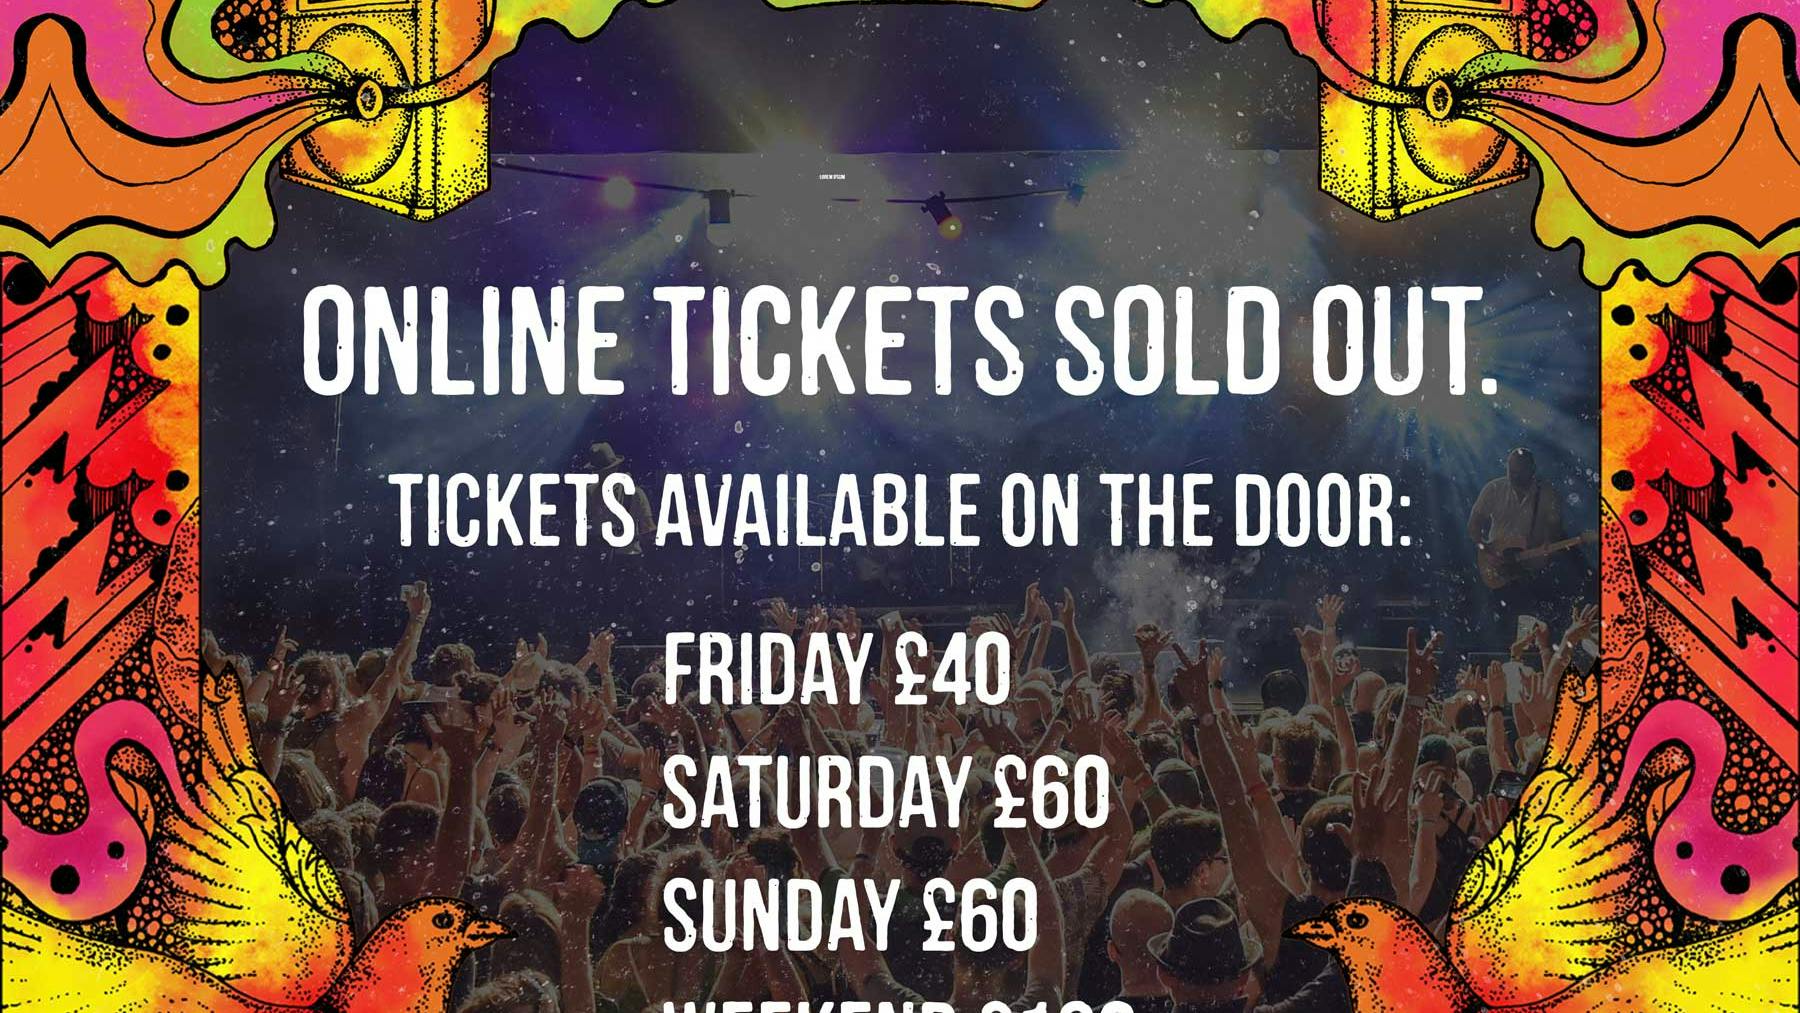 Online tickets sold out!